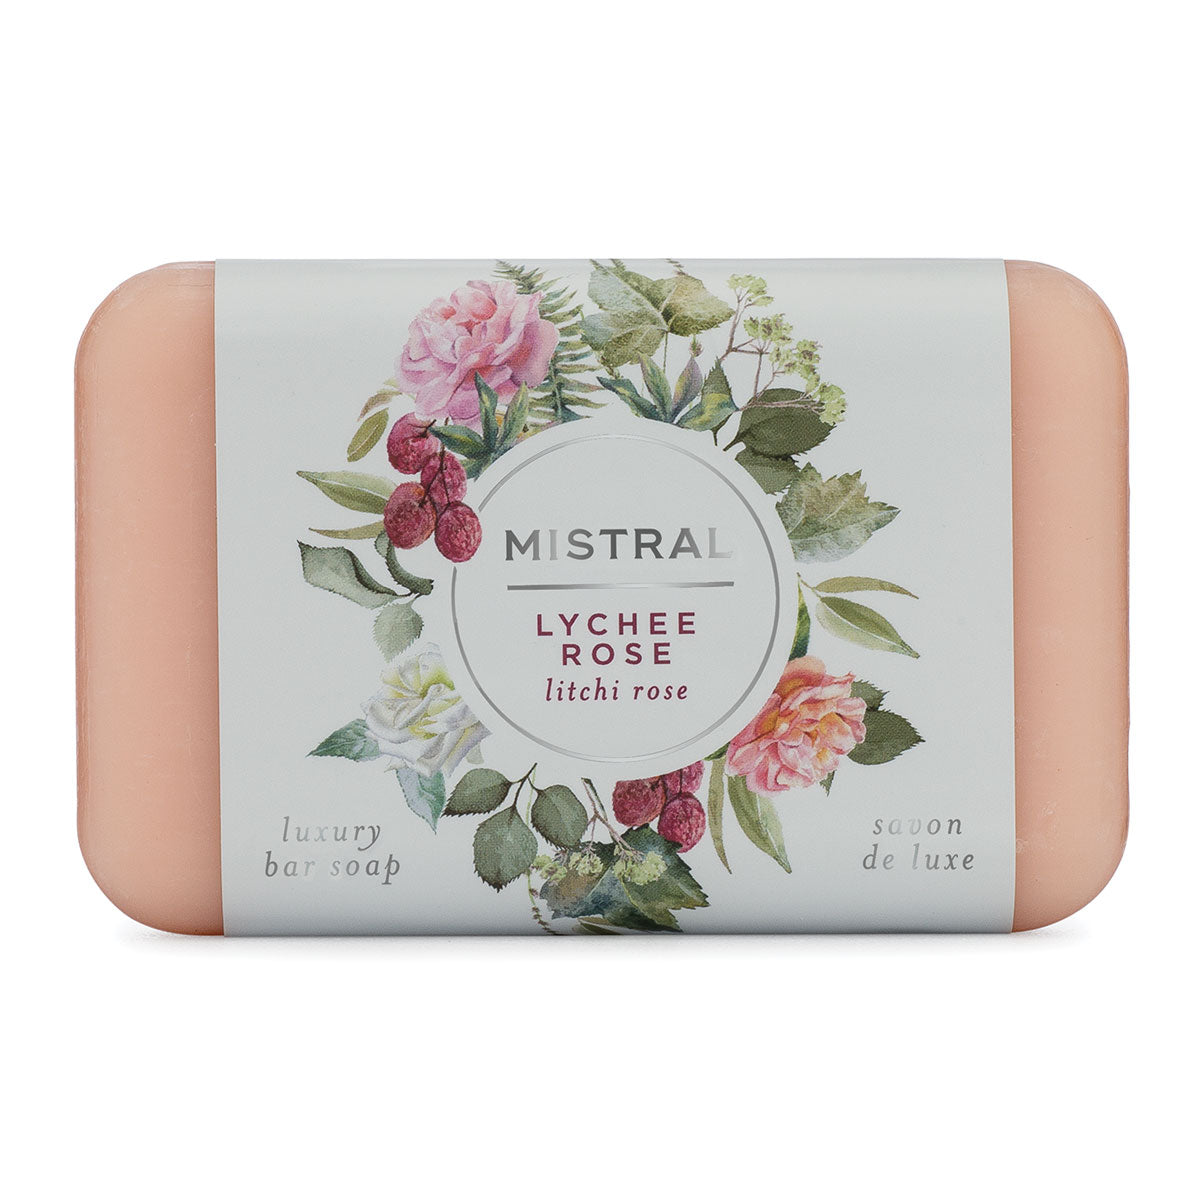 Mistral Classic Lychee Rose Soap 7oz Bar